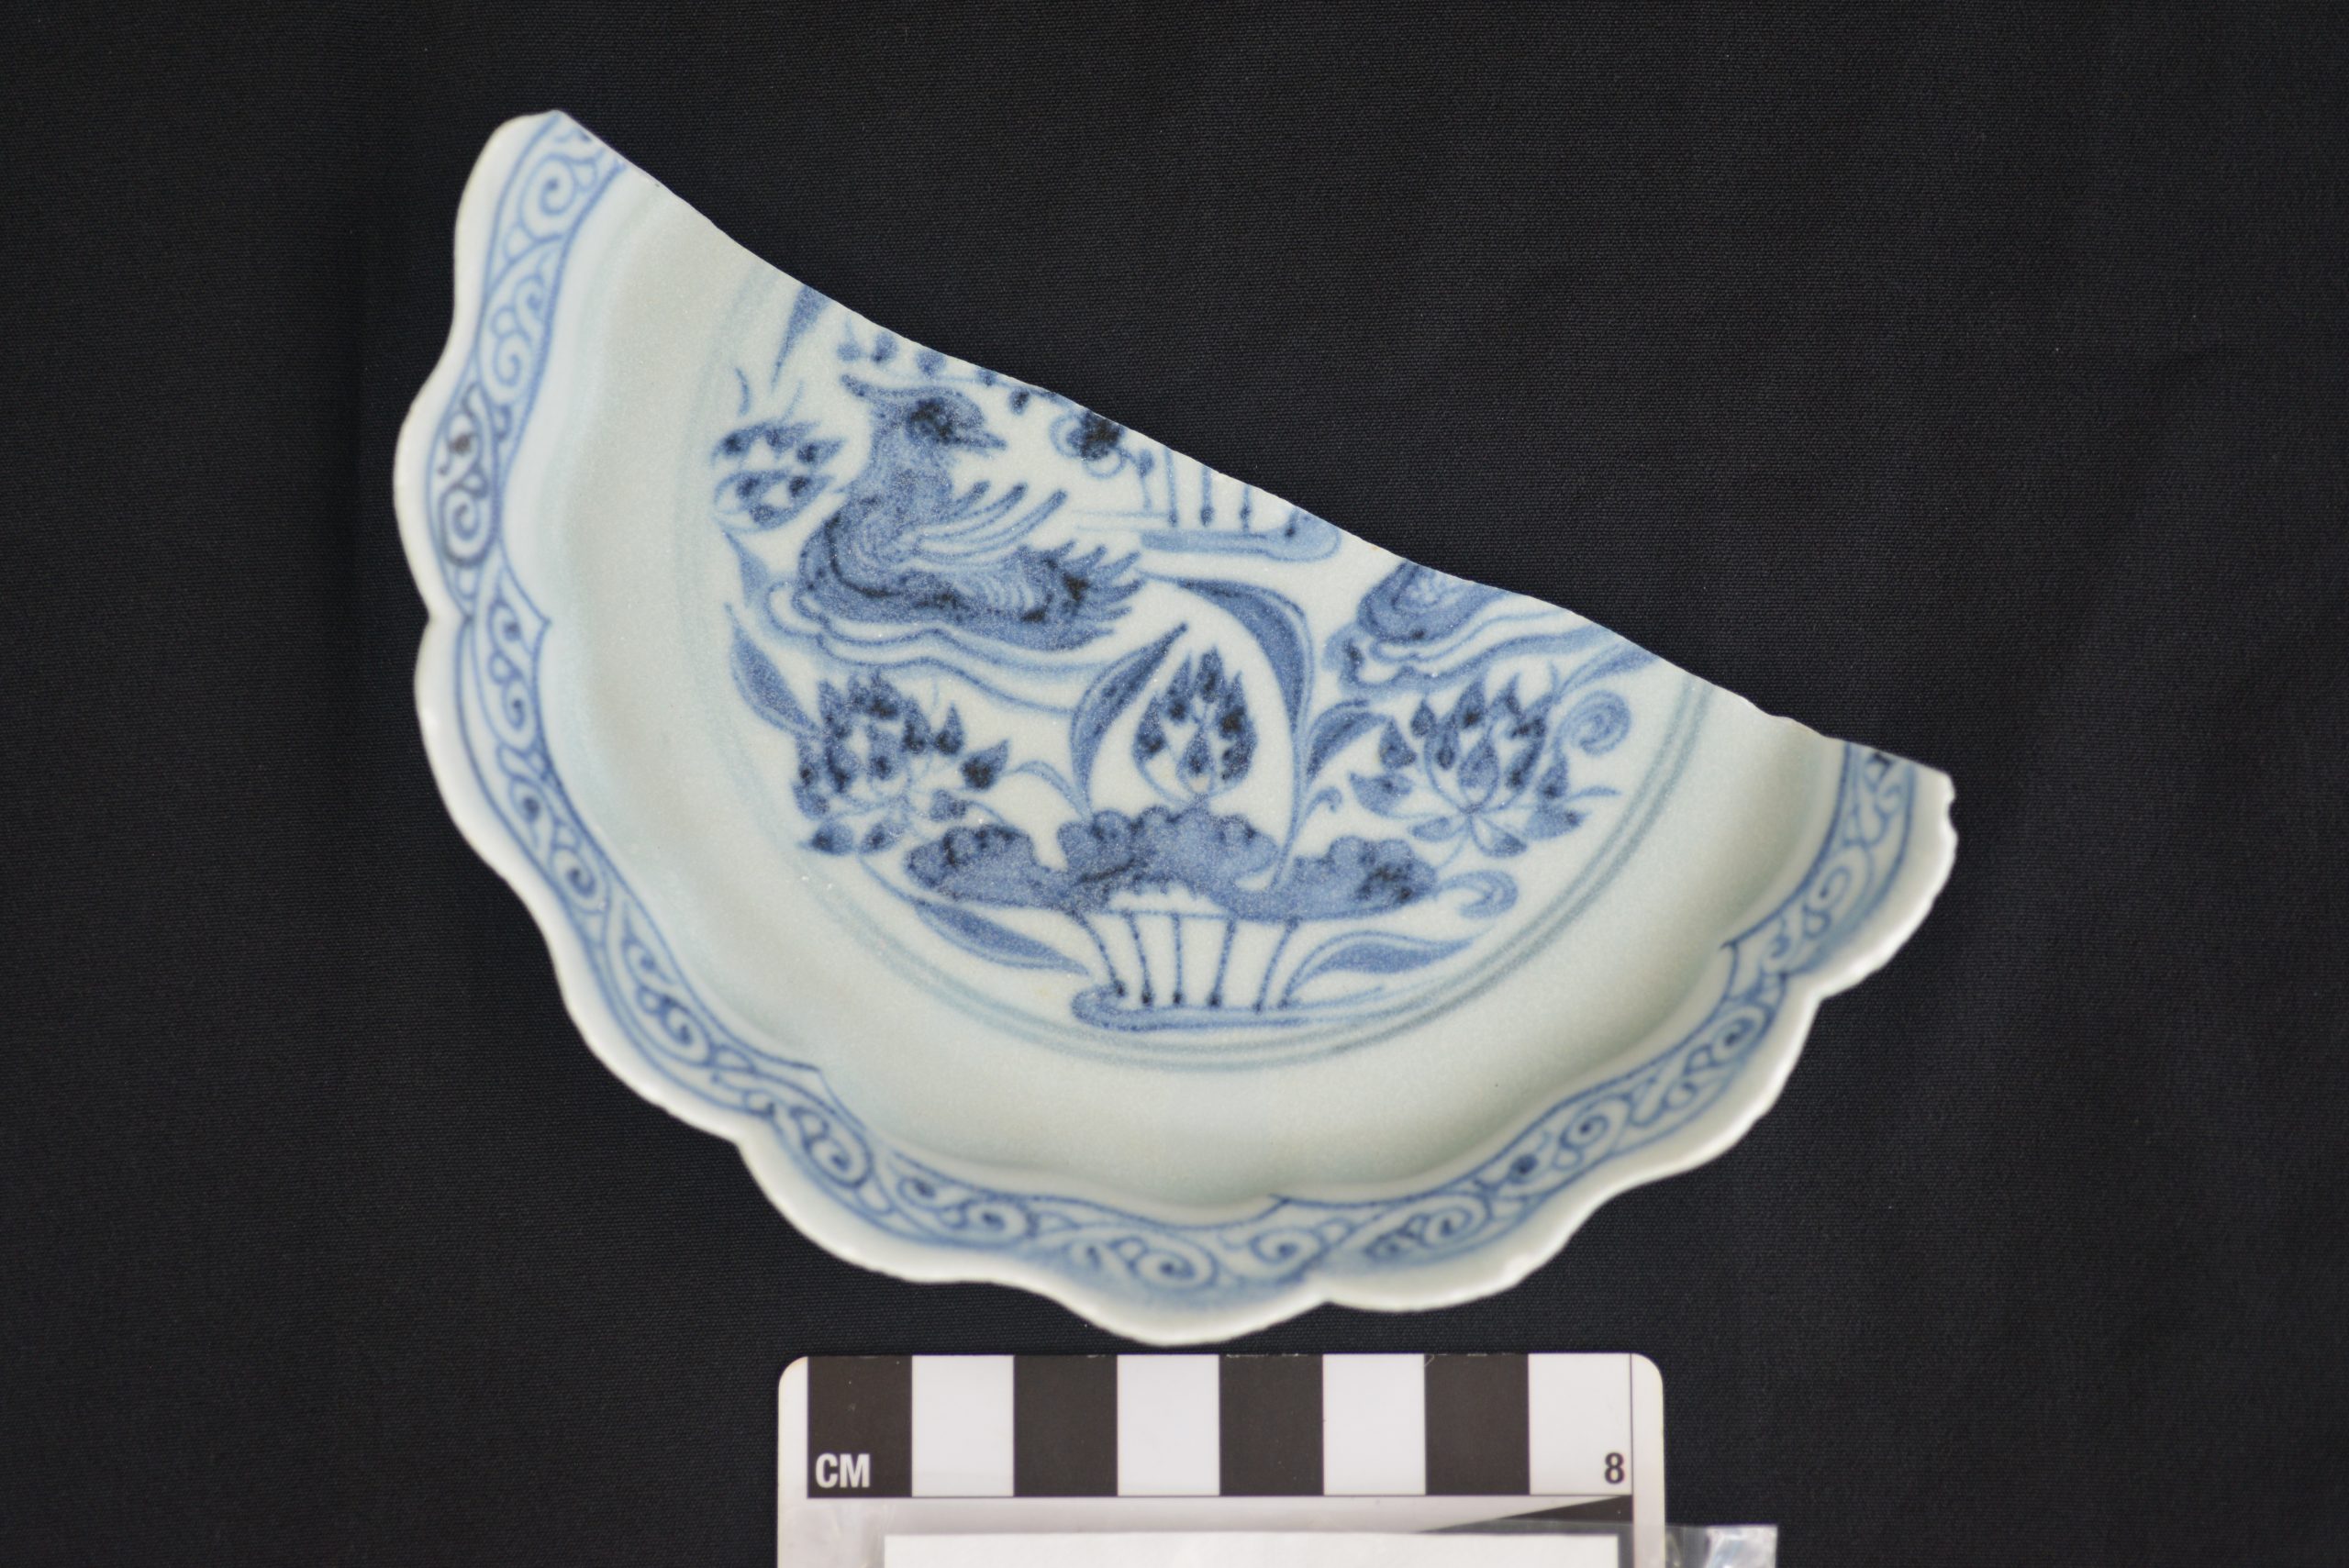 Small and fine blue-and-white dish with lobed rim from SW1